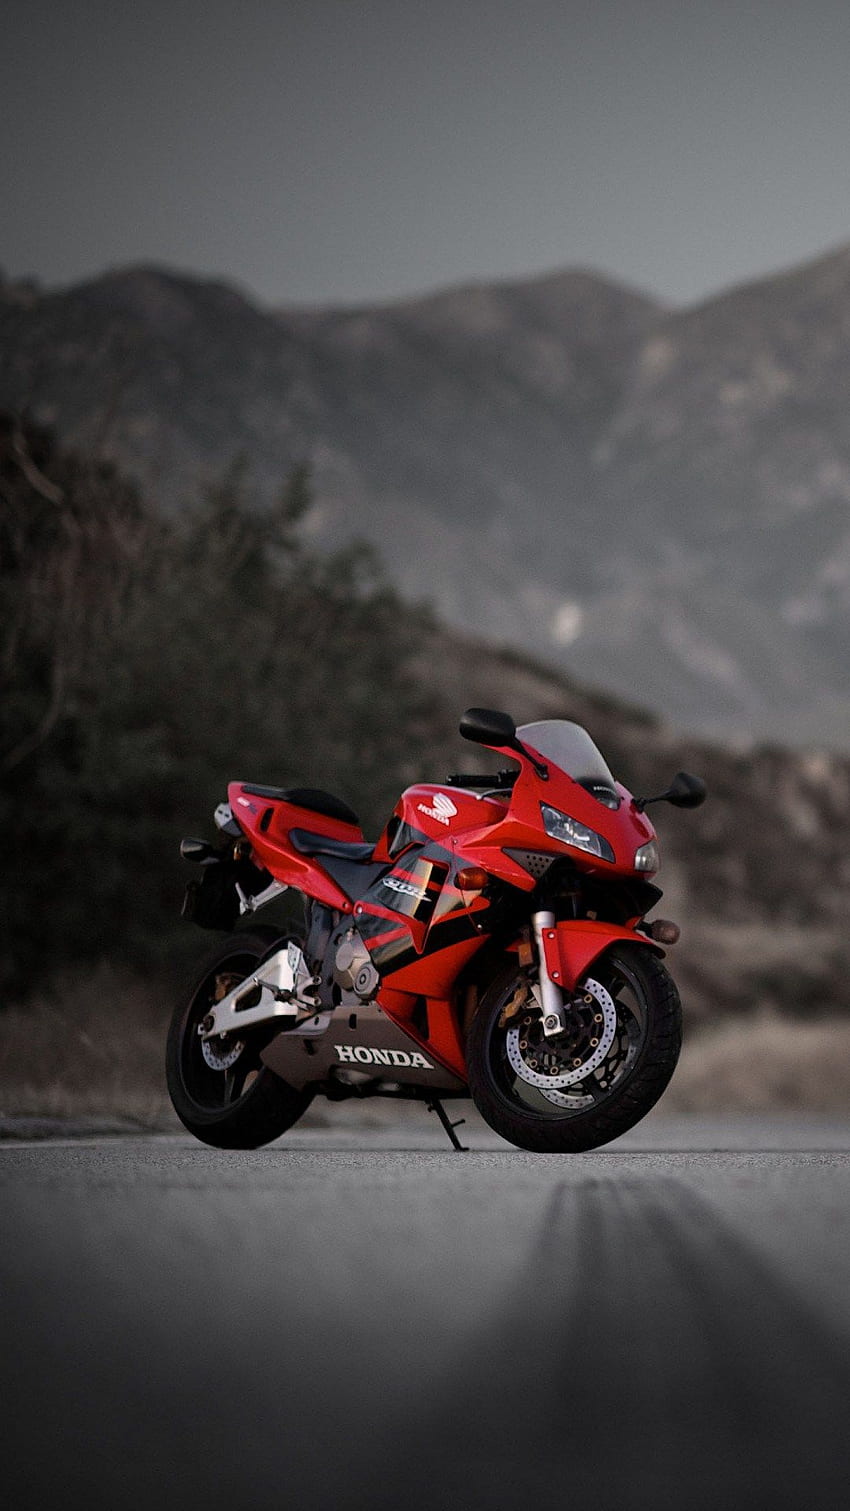 Honda CBR600RR Red Sport Motorcycle IPhone 6 6 Plus And IPhone 5 4 HD phone wallpaper